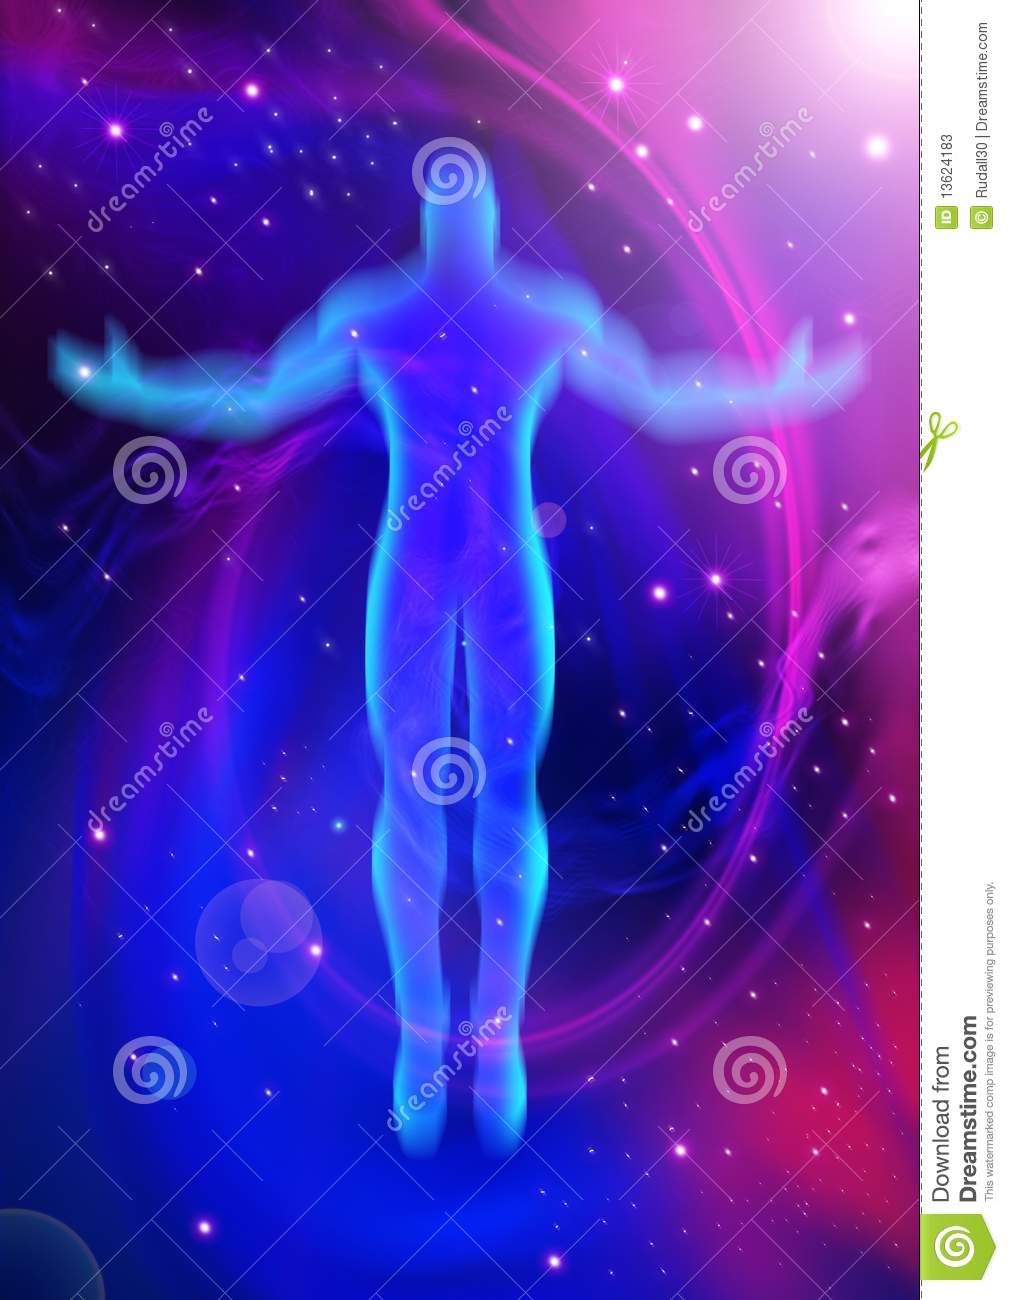 An Illustration Of A Figure On A Cosmic Background